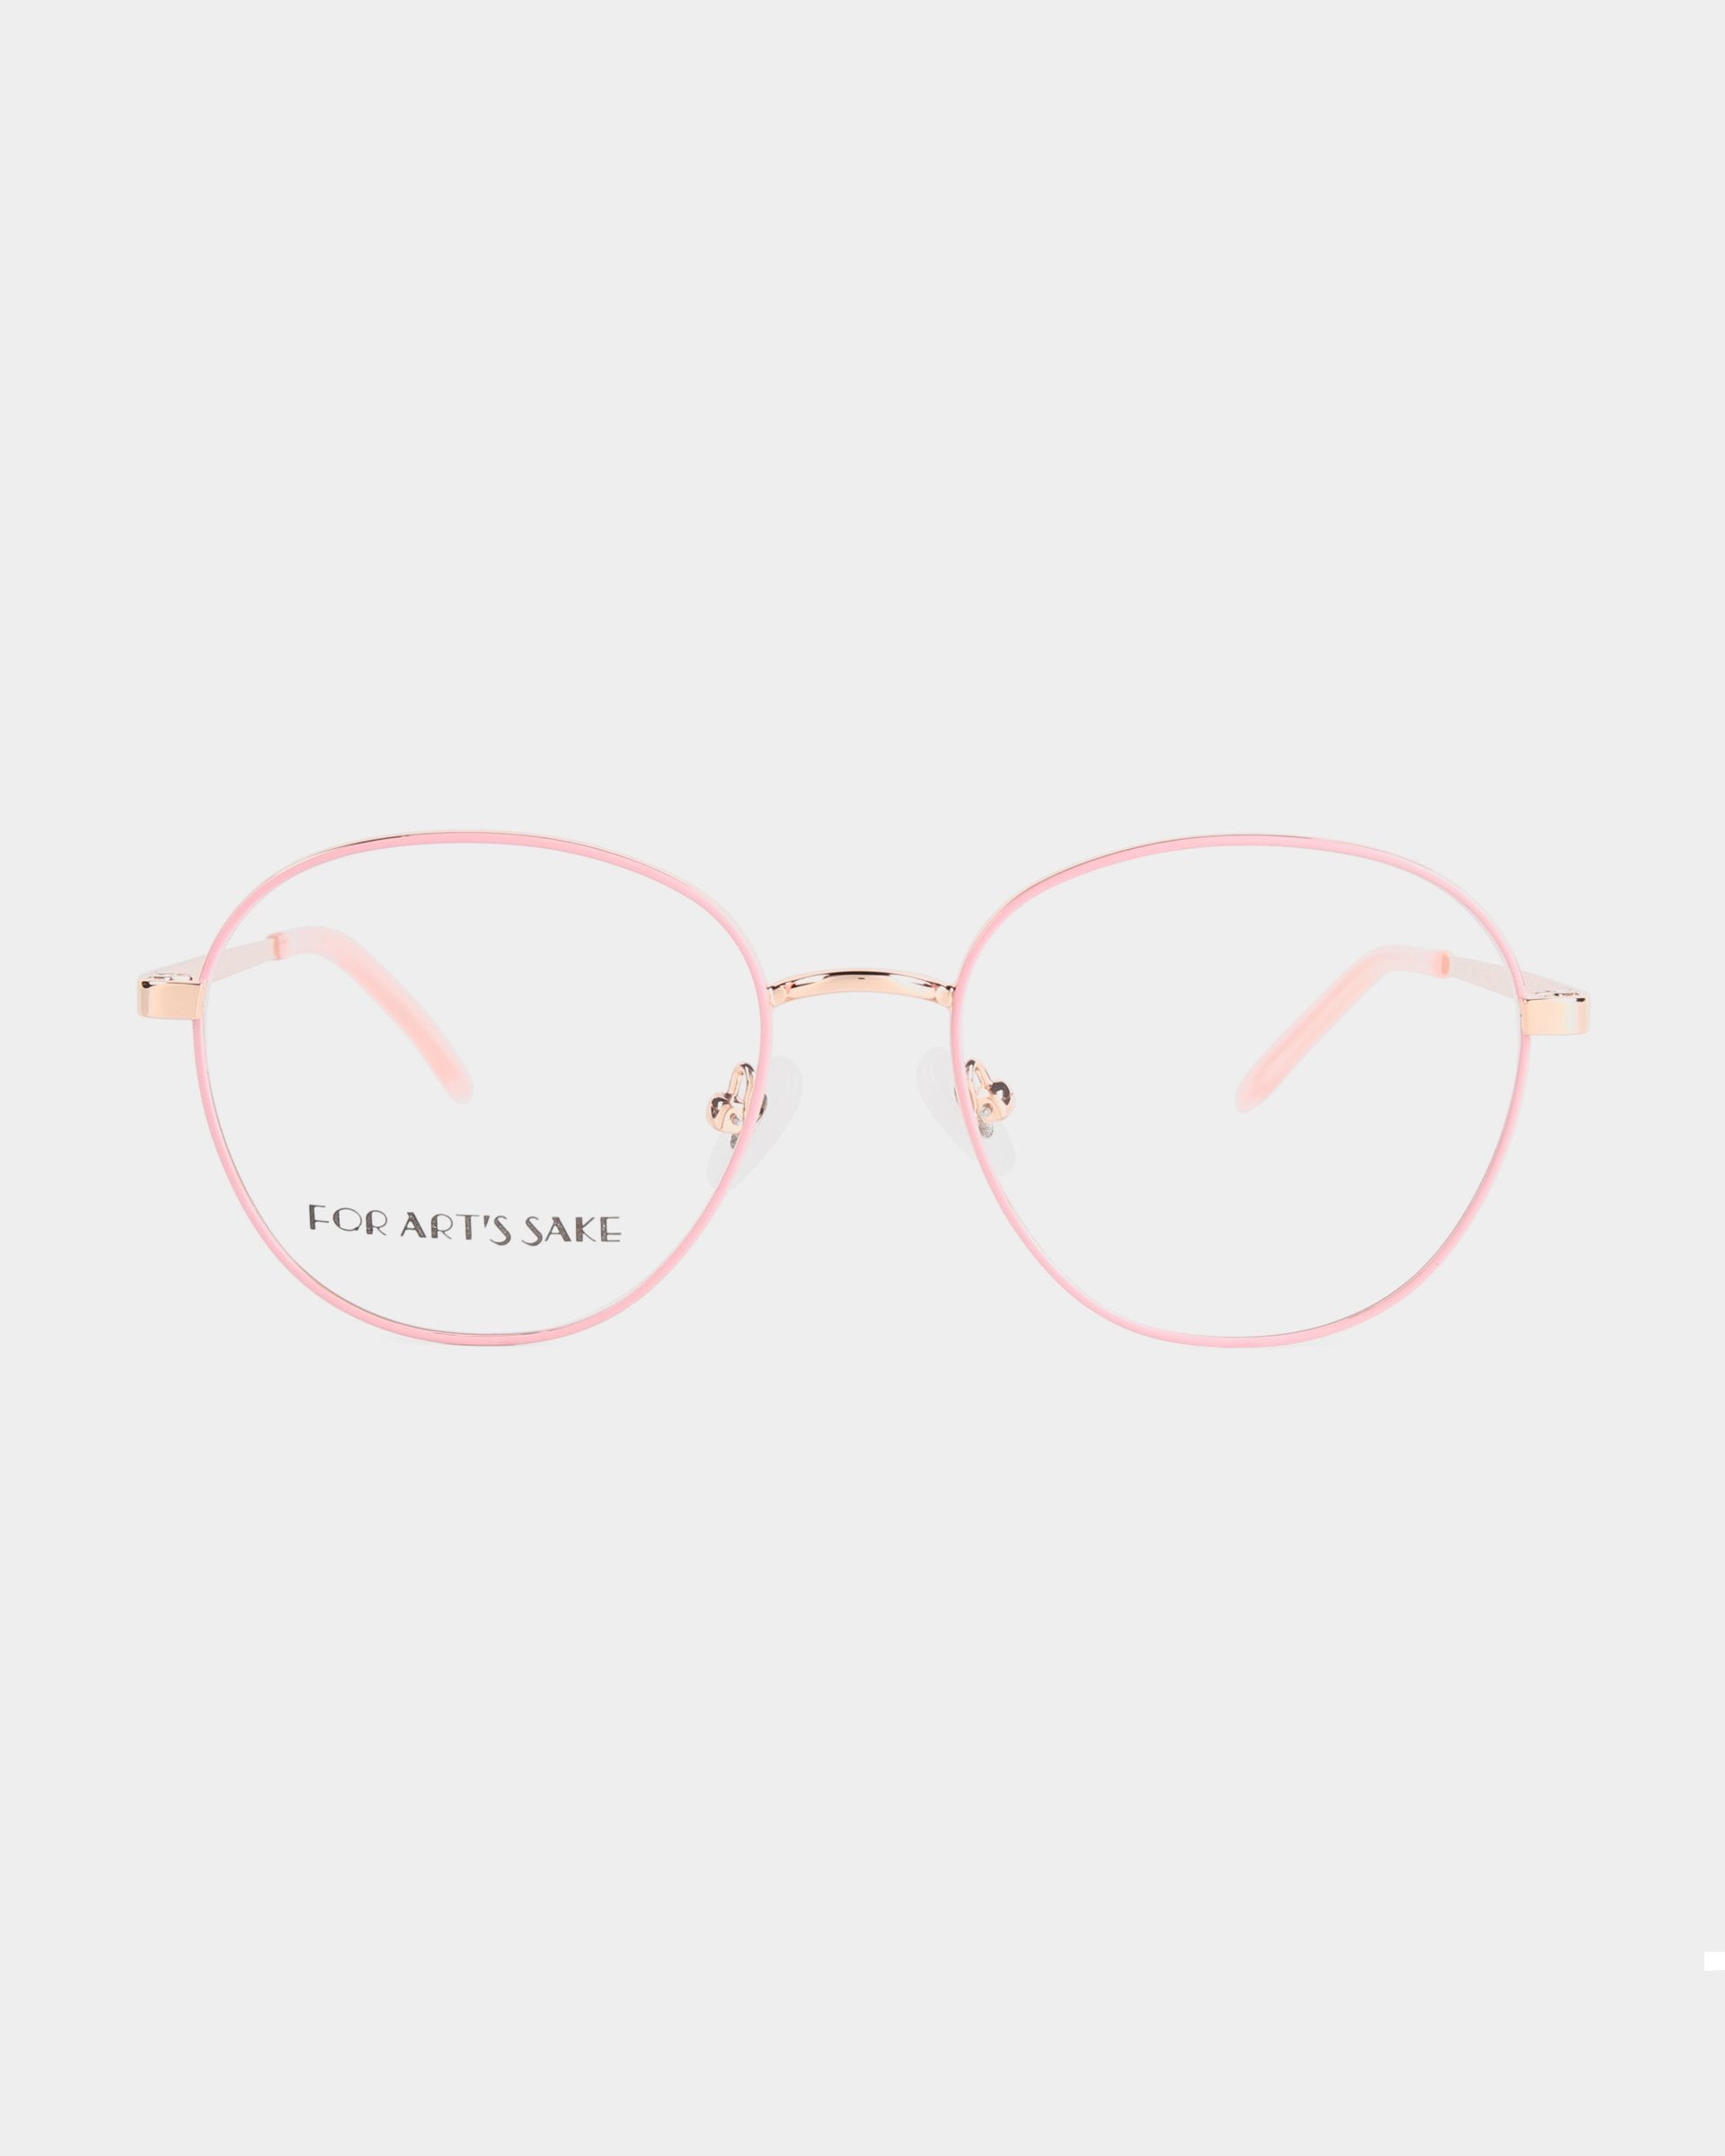 A pair of pink-rimmed eyeglasses with clear lenses on a white background. Featuring a metal frame, these glasses have a slight cat-eye shape and soft pink accents on the adjustable nose pads and temple tips. The left lens has the brand name "For Art's Sake®" visible. Introducing the Hailey by For Art's Sake®.